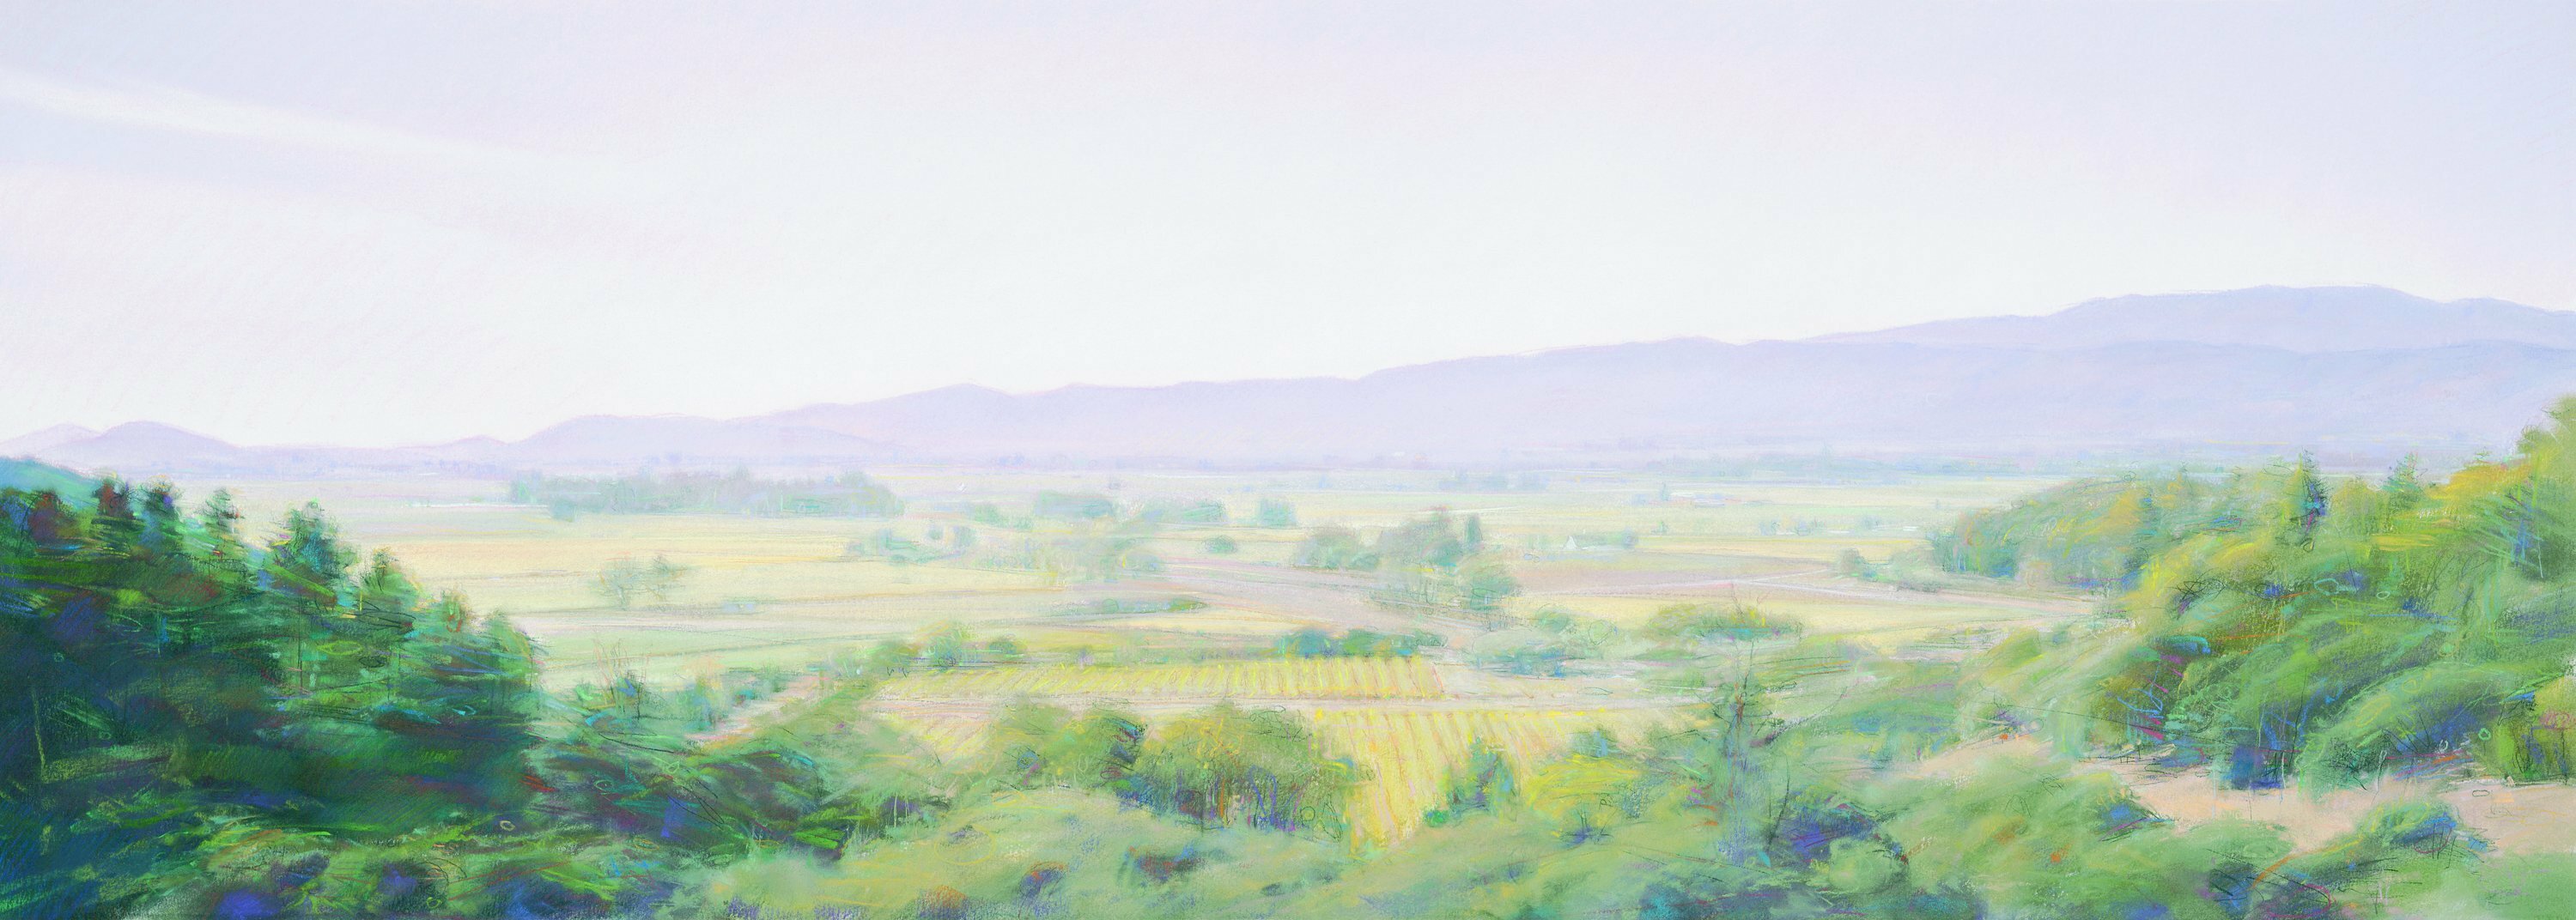 Steven Gordon; Autumn From Auberge, 2001, Original Giclee Reproduction, 40 x 14 inches. Artwork description: 241 Limited Edition Print from an original pastel painting An Autumn view from the inn Auberge du Soleil in Rutherford, Napa Valley - toward the hills of Yountville in the distance. ...